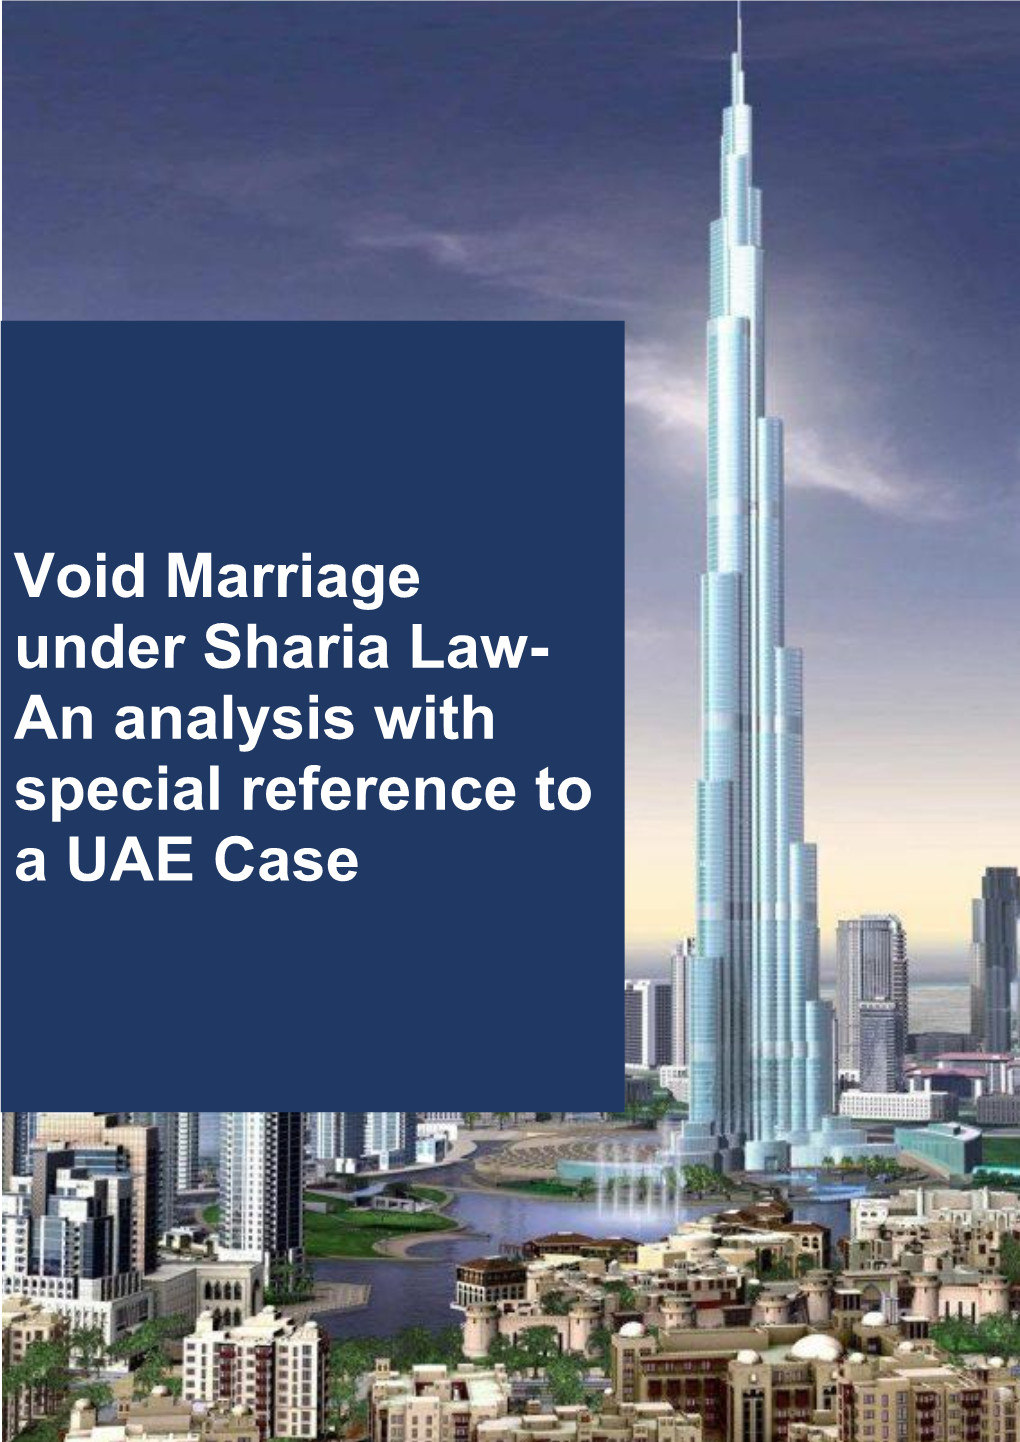 Void Marriage Under Sharia Law- an Analysis with Special Reference to a UAE Case